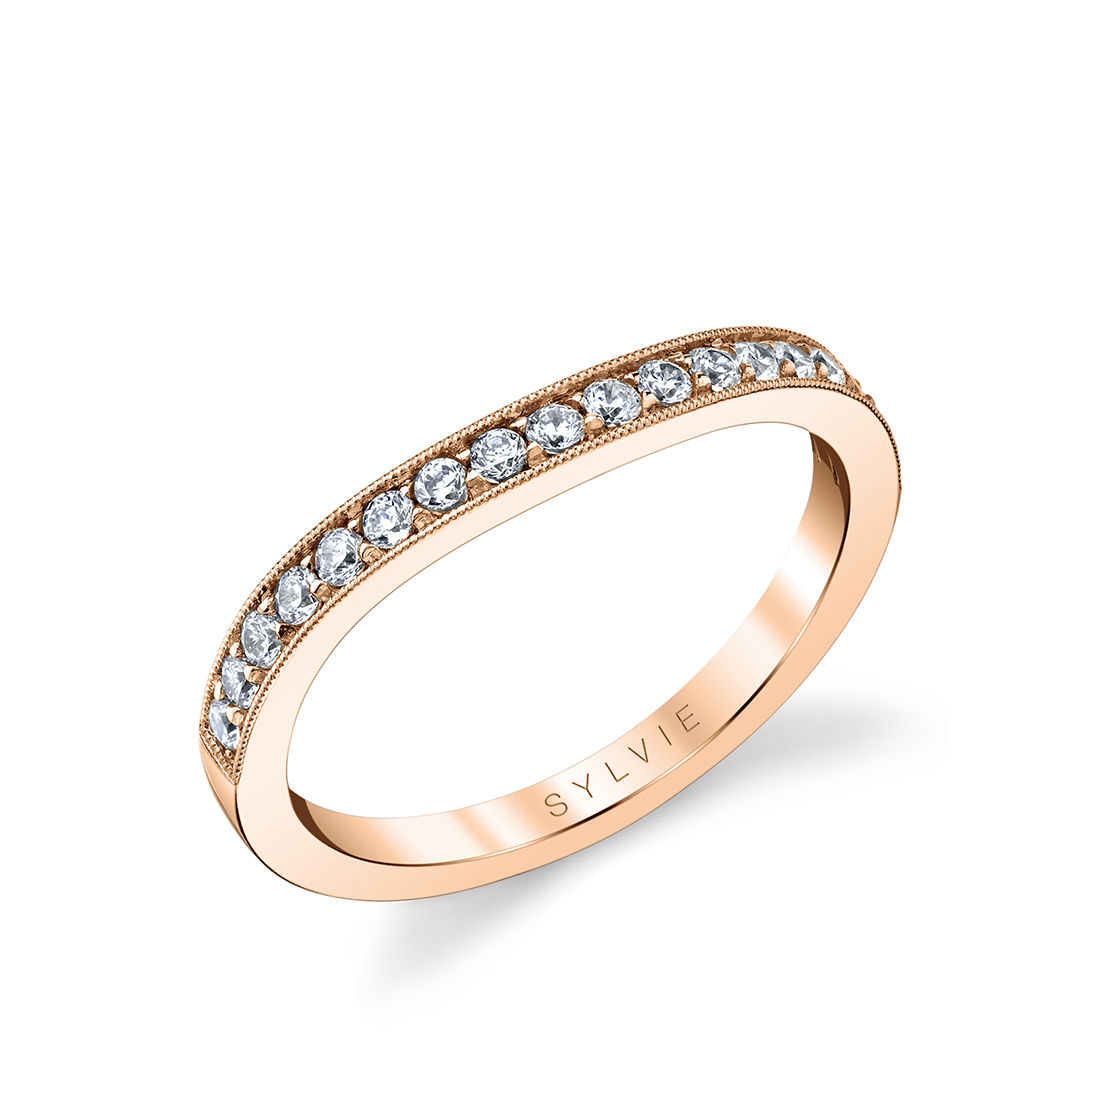 channel set wedding band with milgrain detail in rose gold